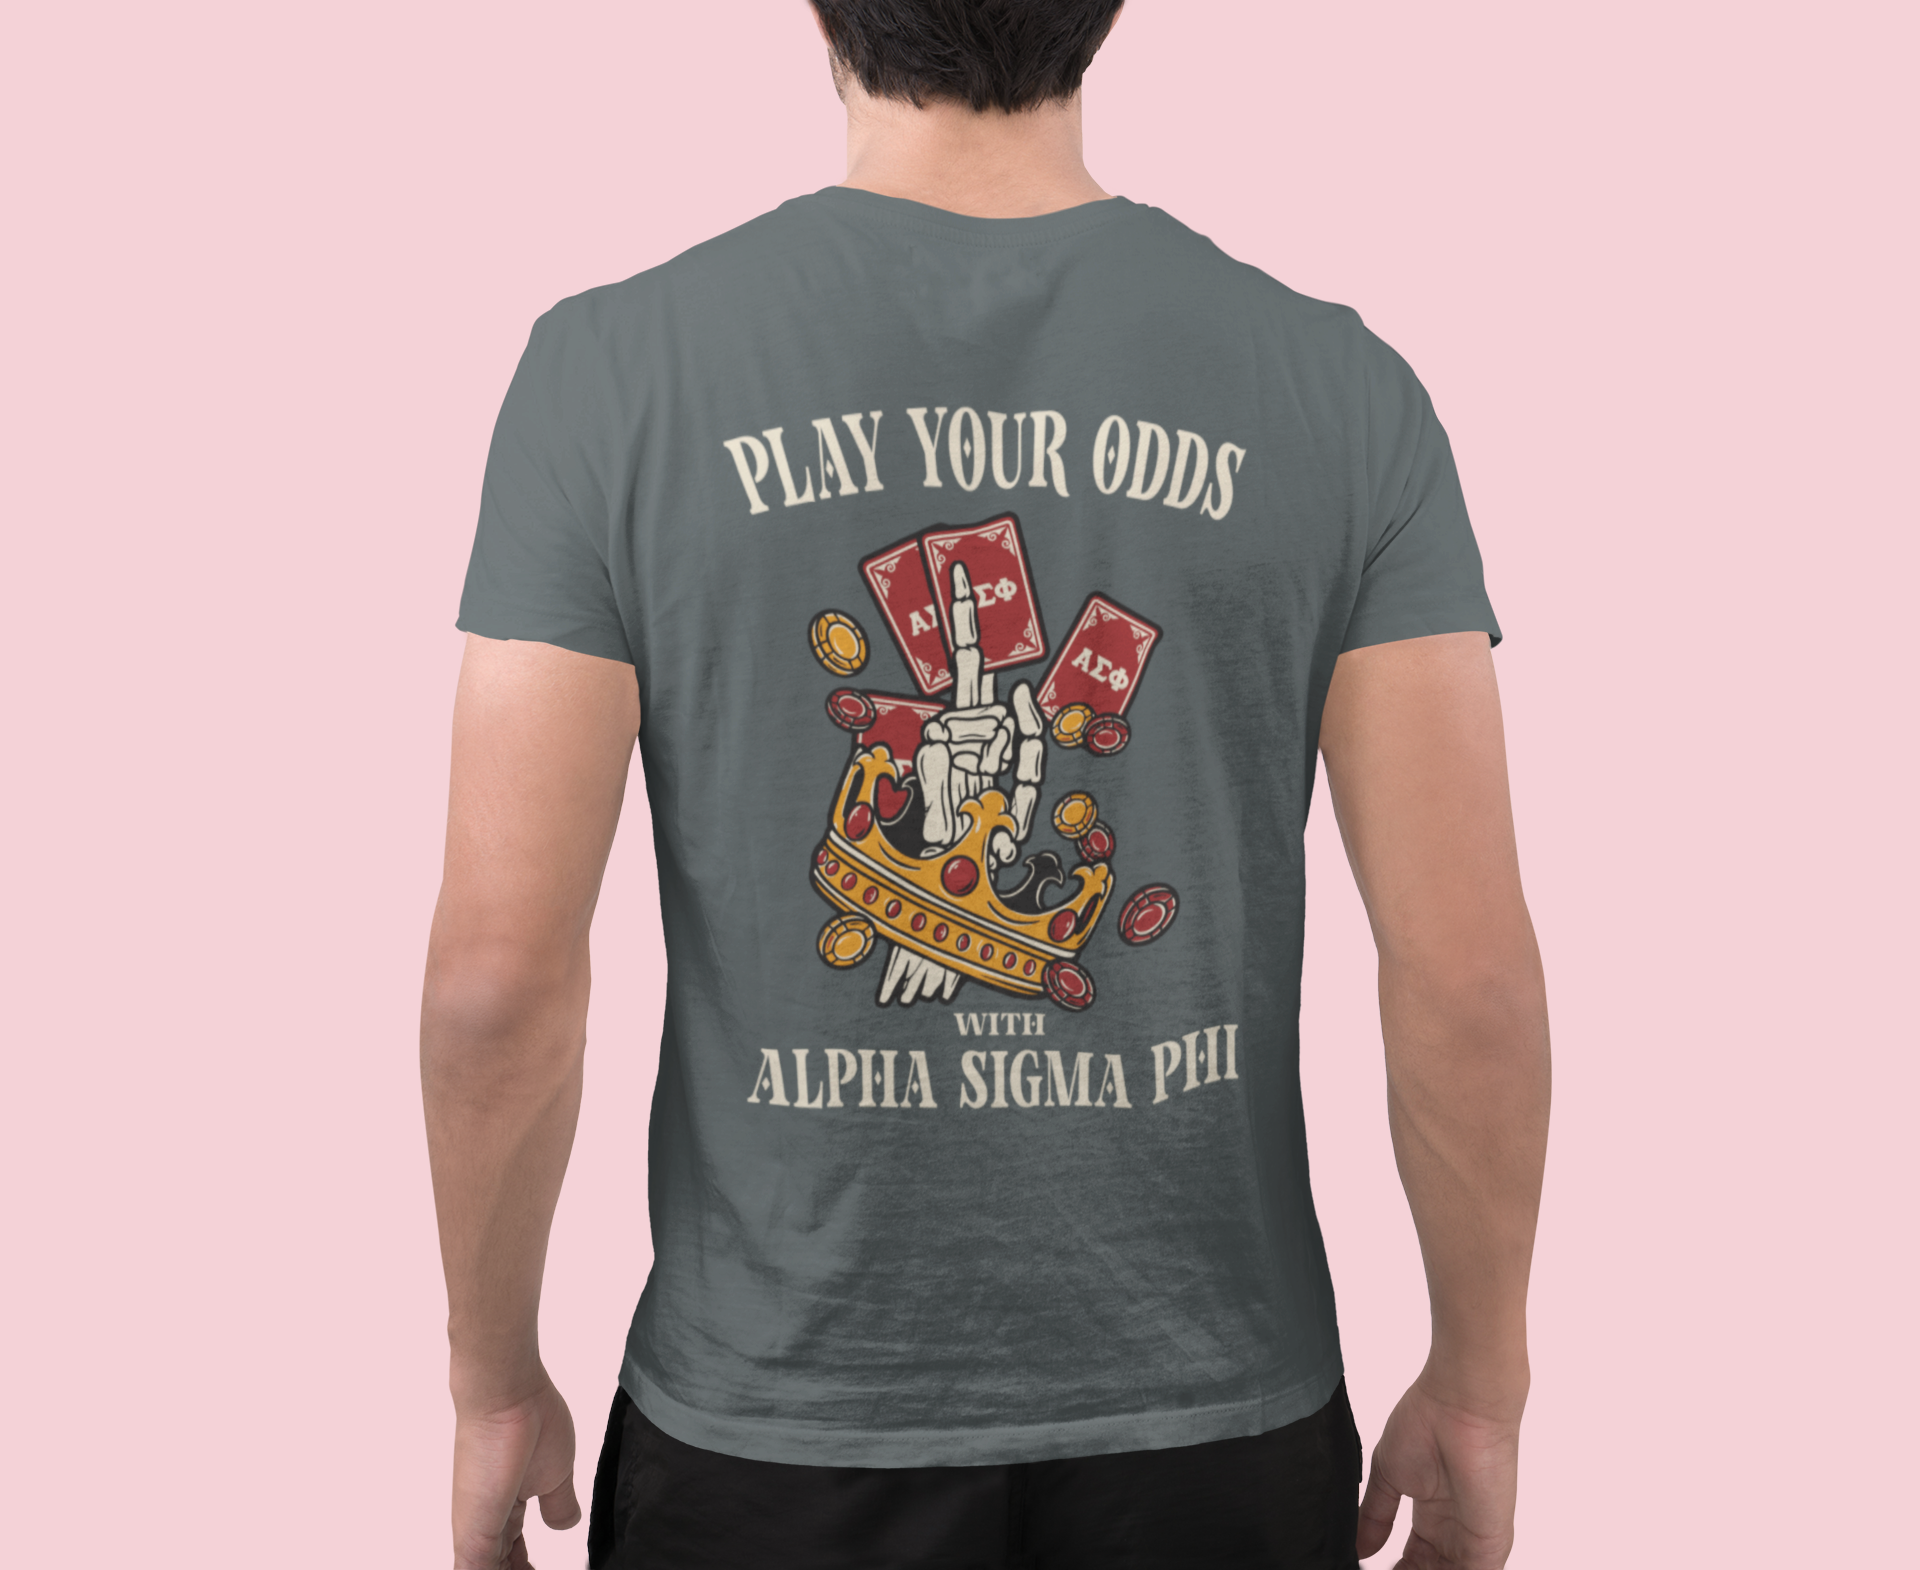 Alpha Sigma Phi Graphic T-Shirt | Play Your Odds | Alpha Sigma Phi Fraternity Shirt  back model 